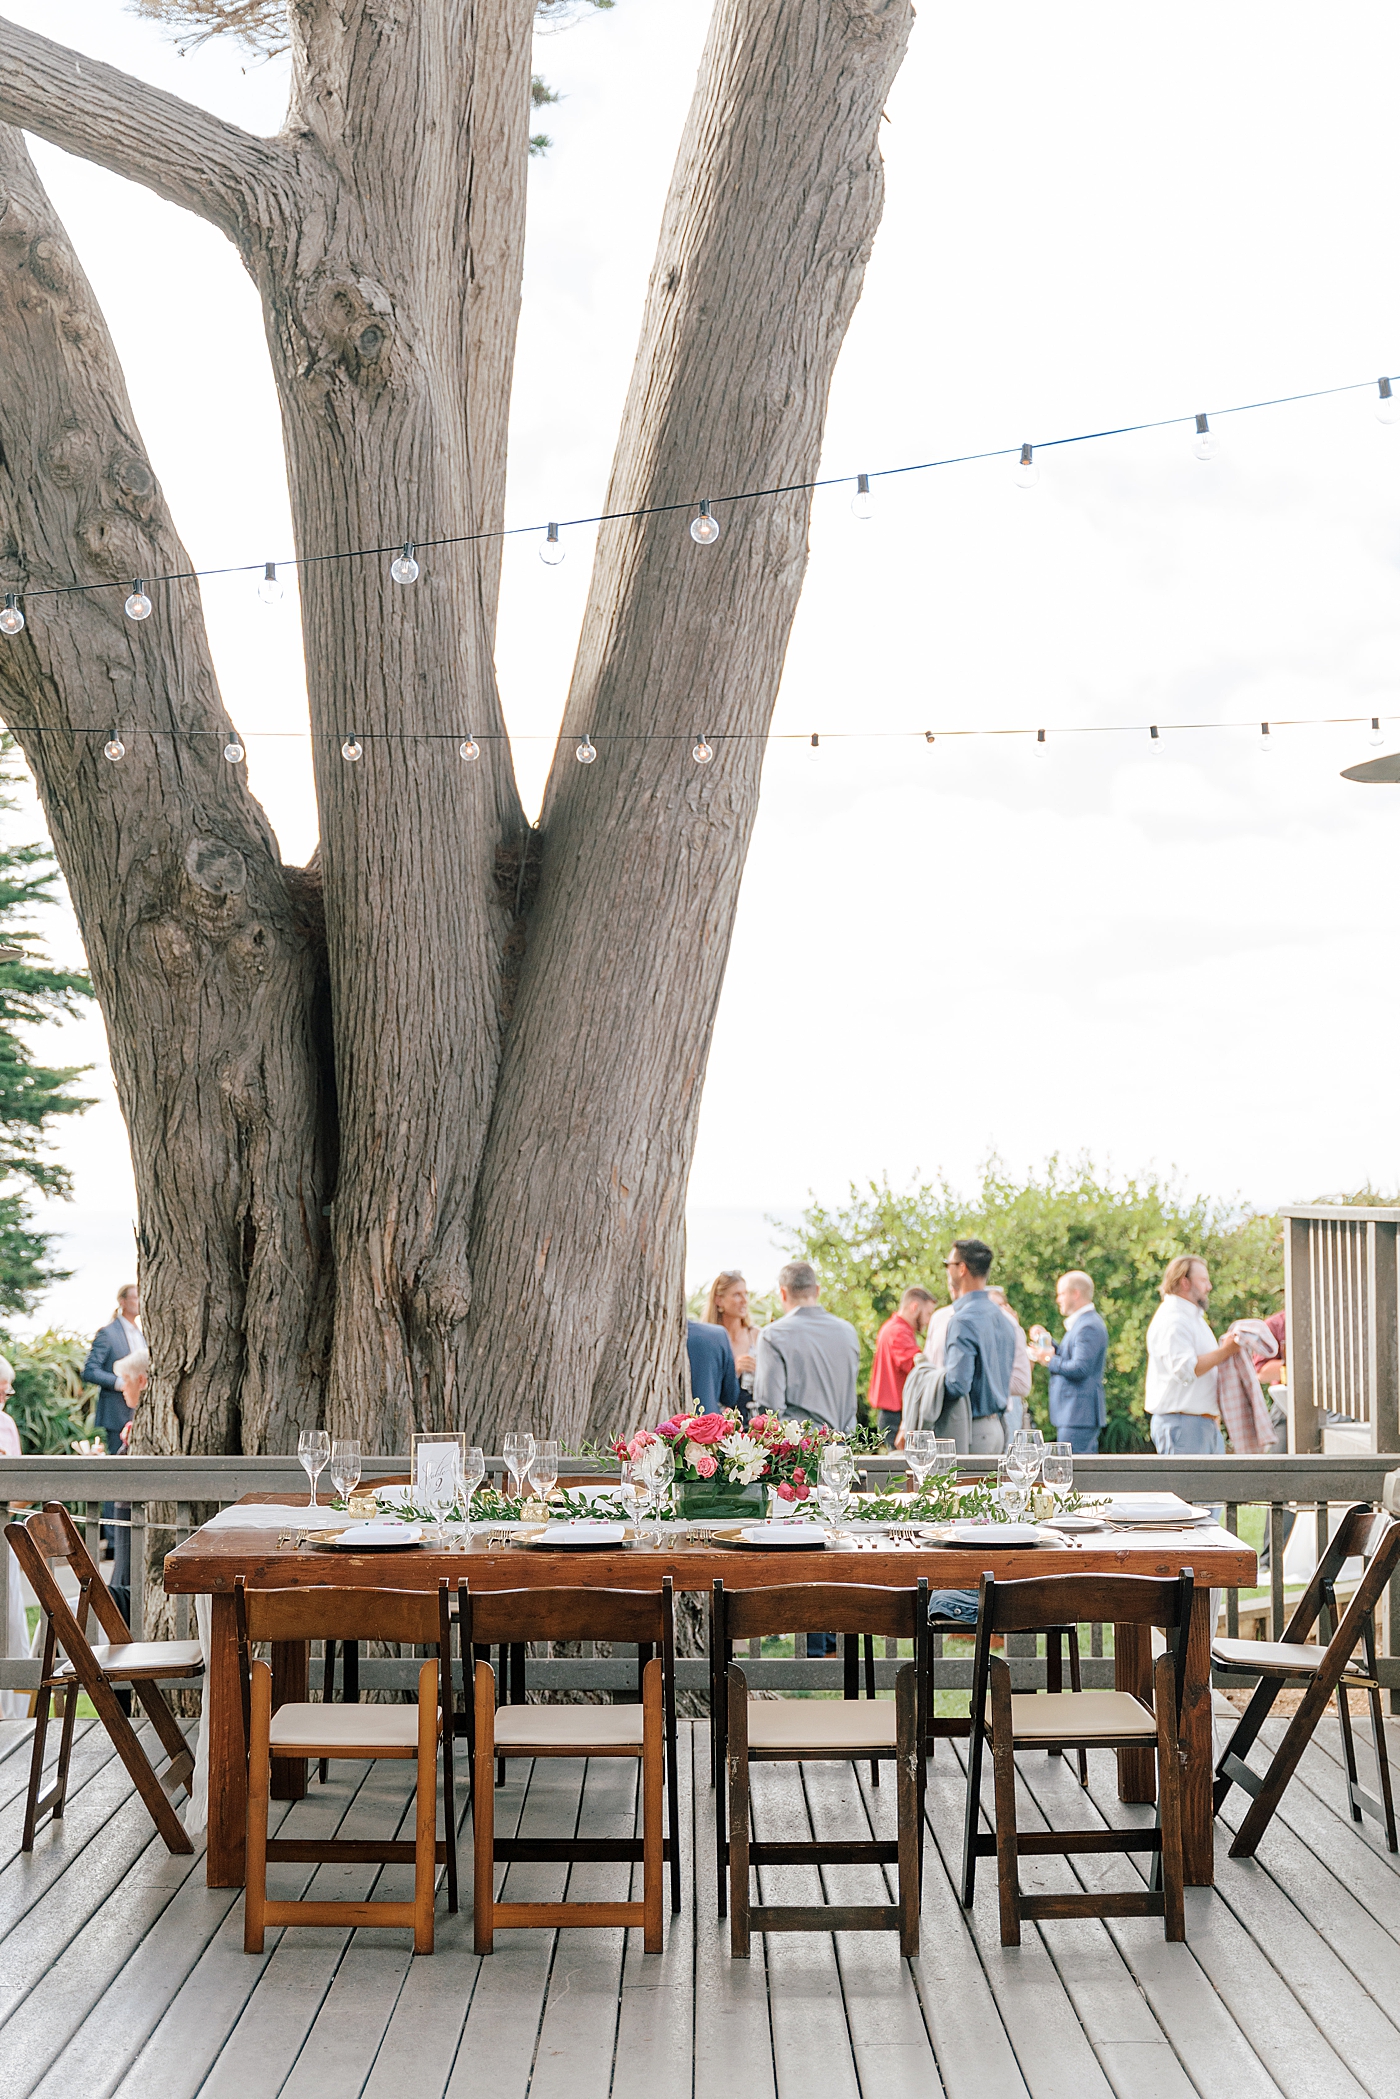 Image of an empty, but set wooden wedding table with folding chairs and string lights | Image by San Diego Wedding Photographer Hope Helmuth